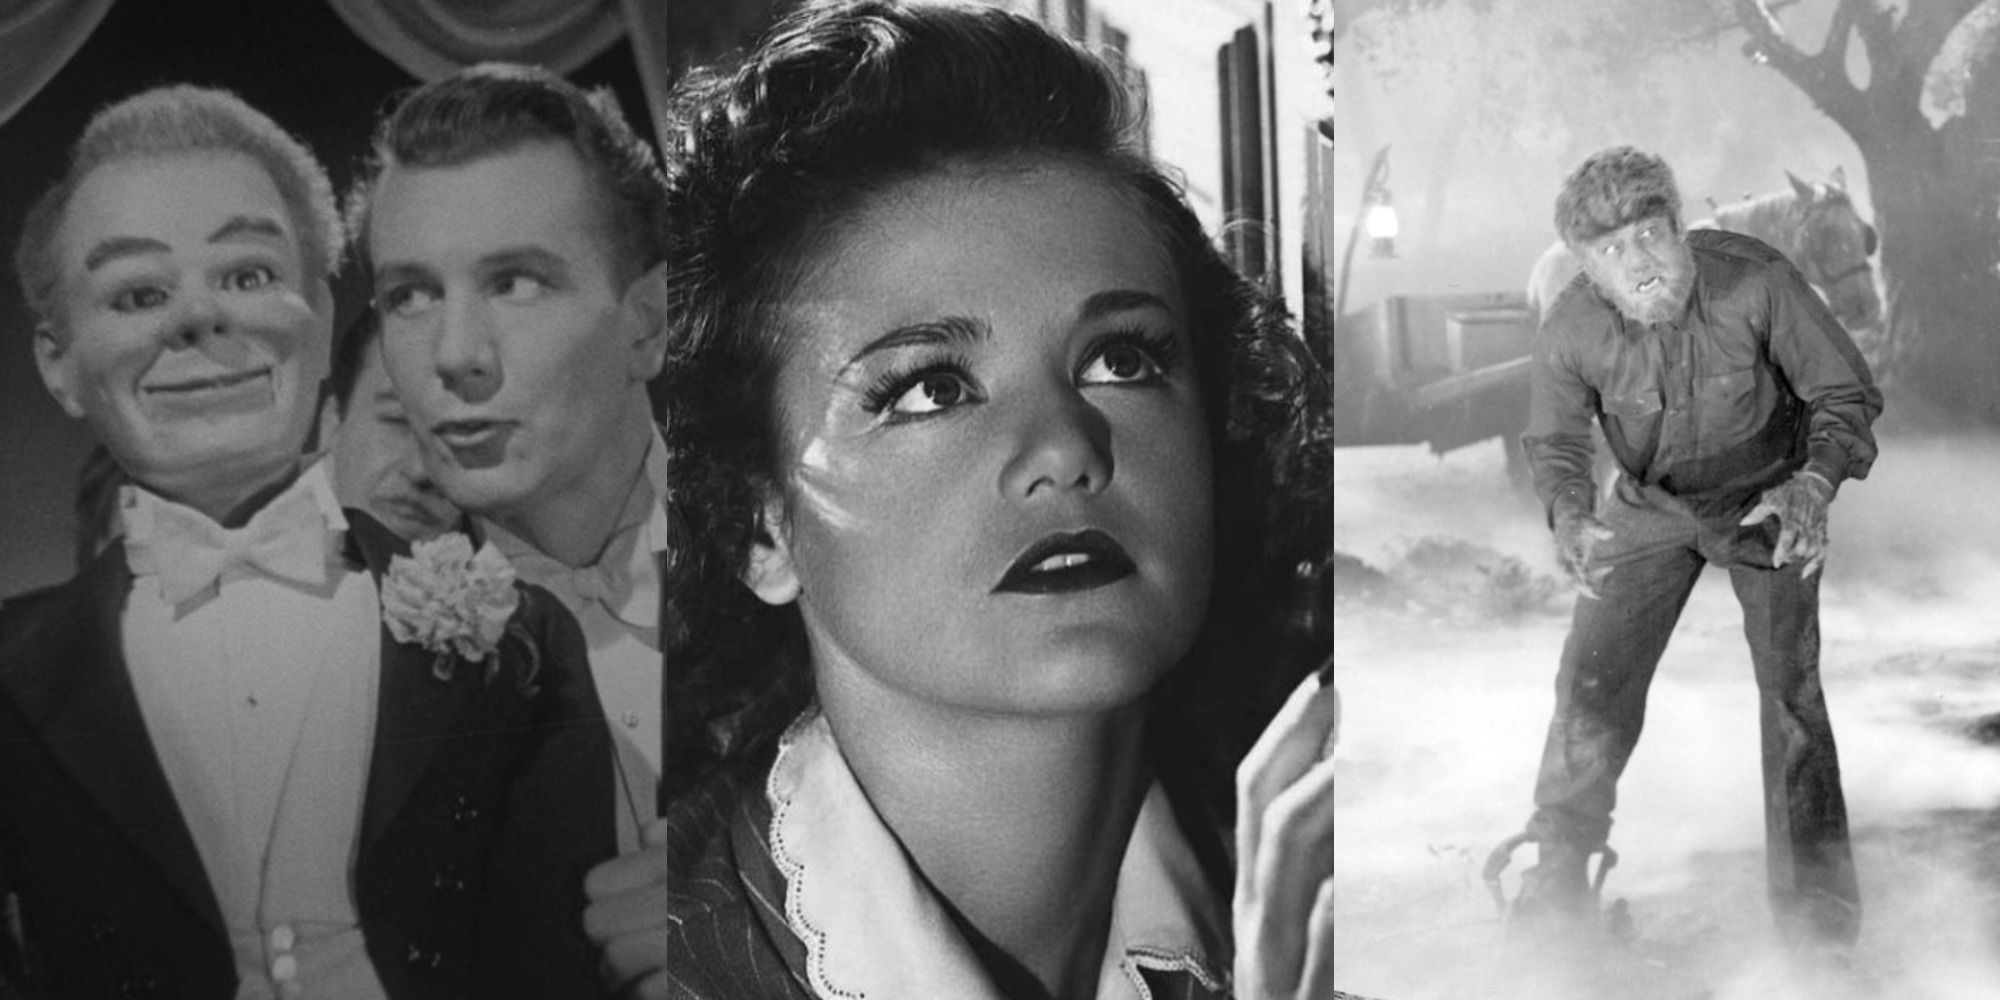 Three side by side images from 1940s horror movies